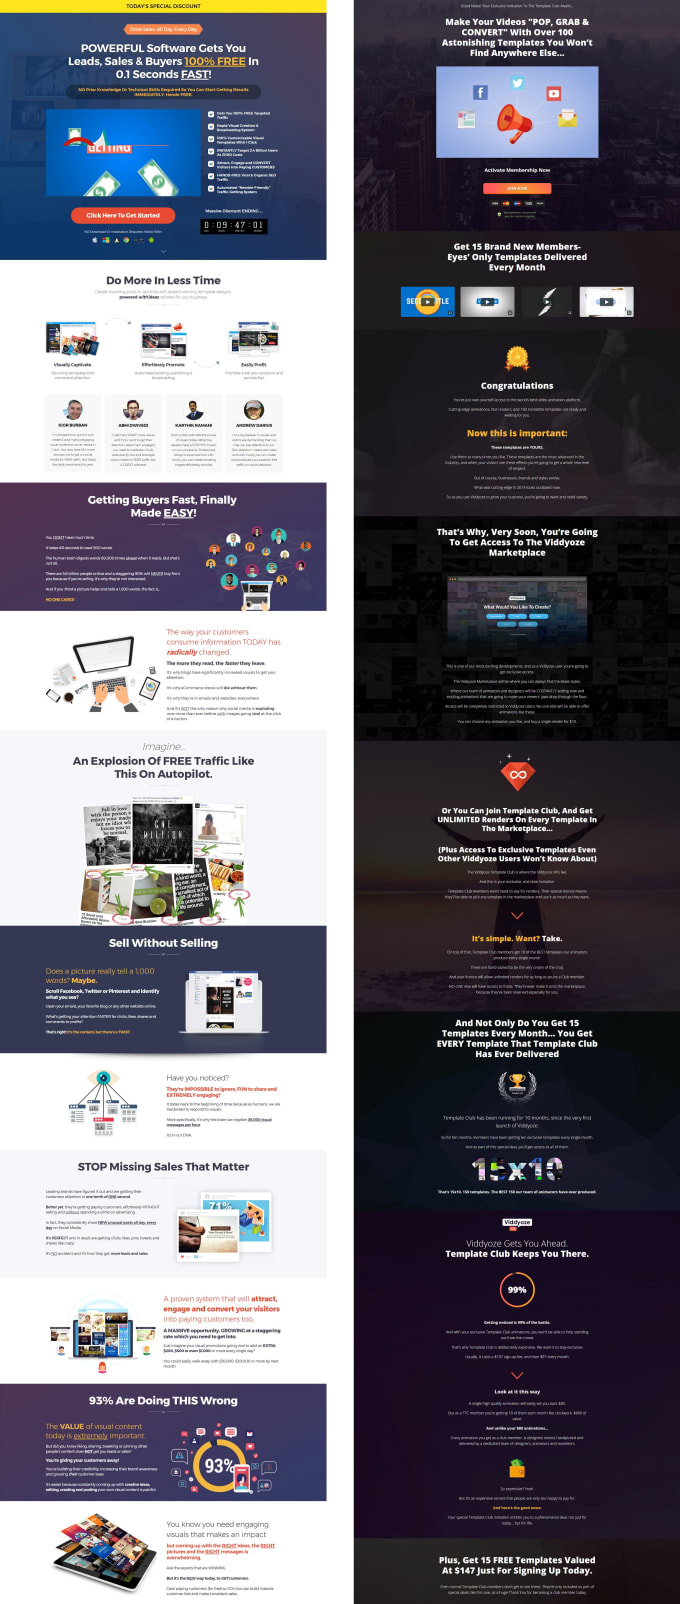 I will design amazing landing page or squeeze page